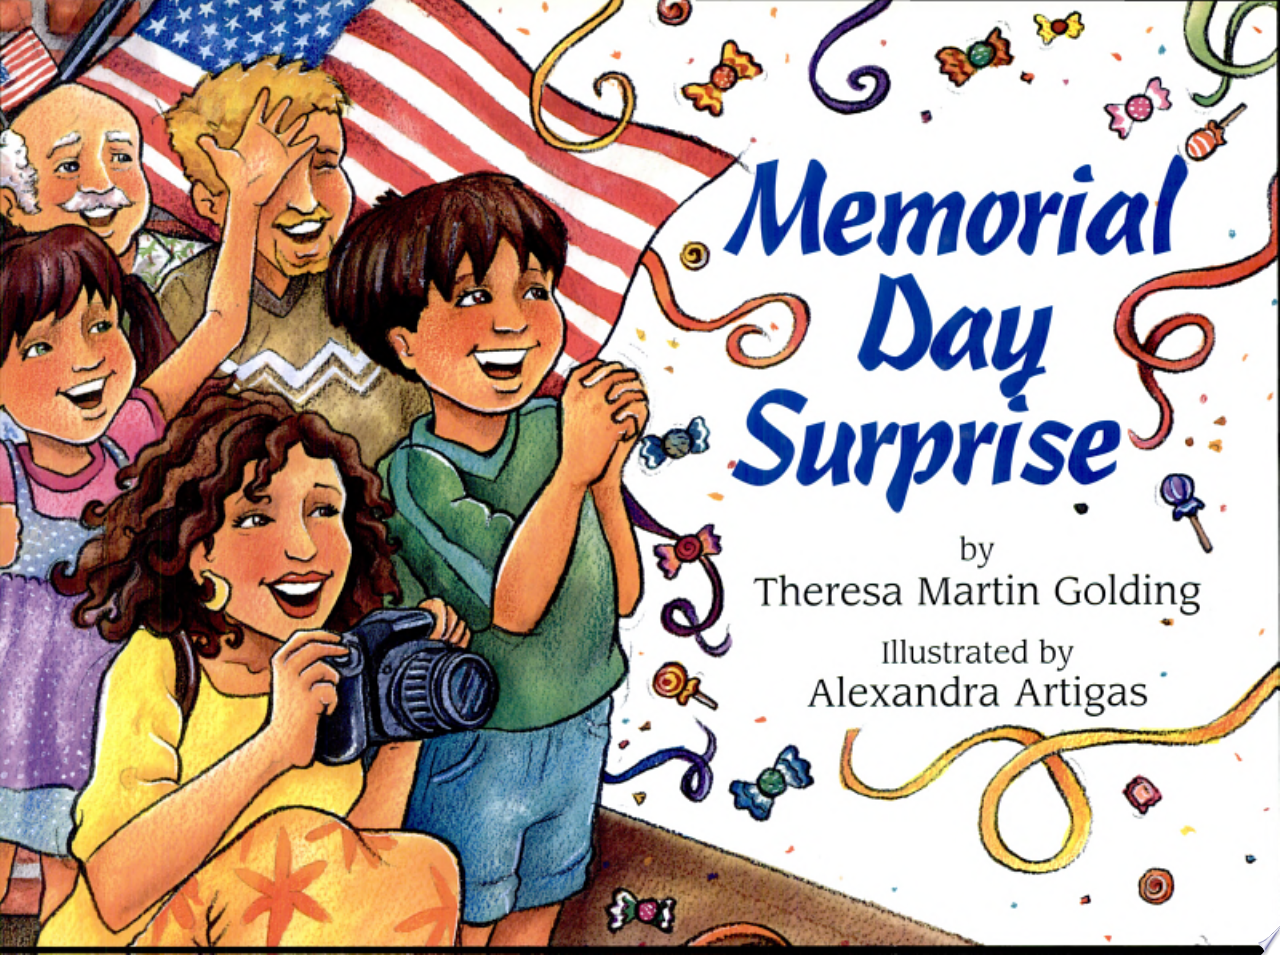 Image for "Memorial Day Surprise"